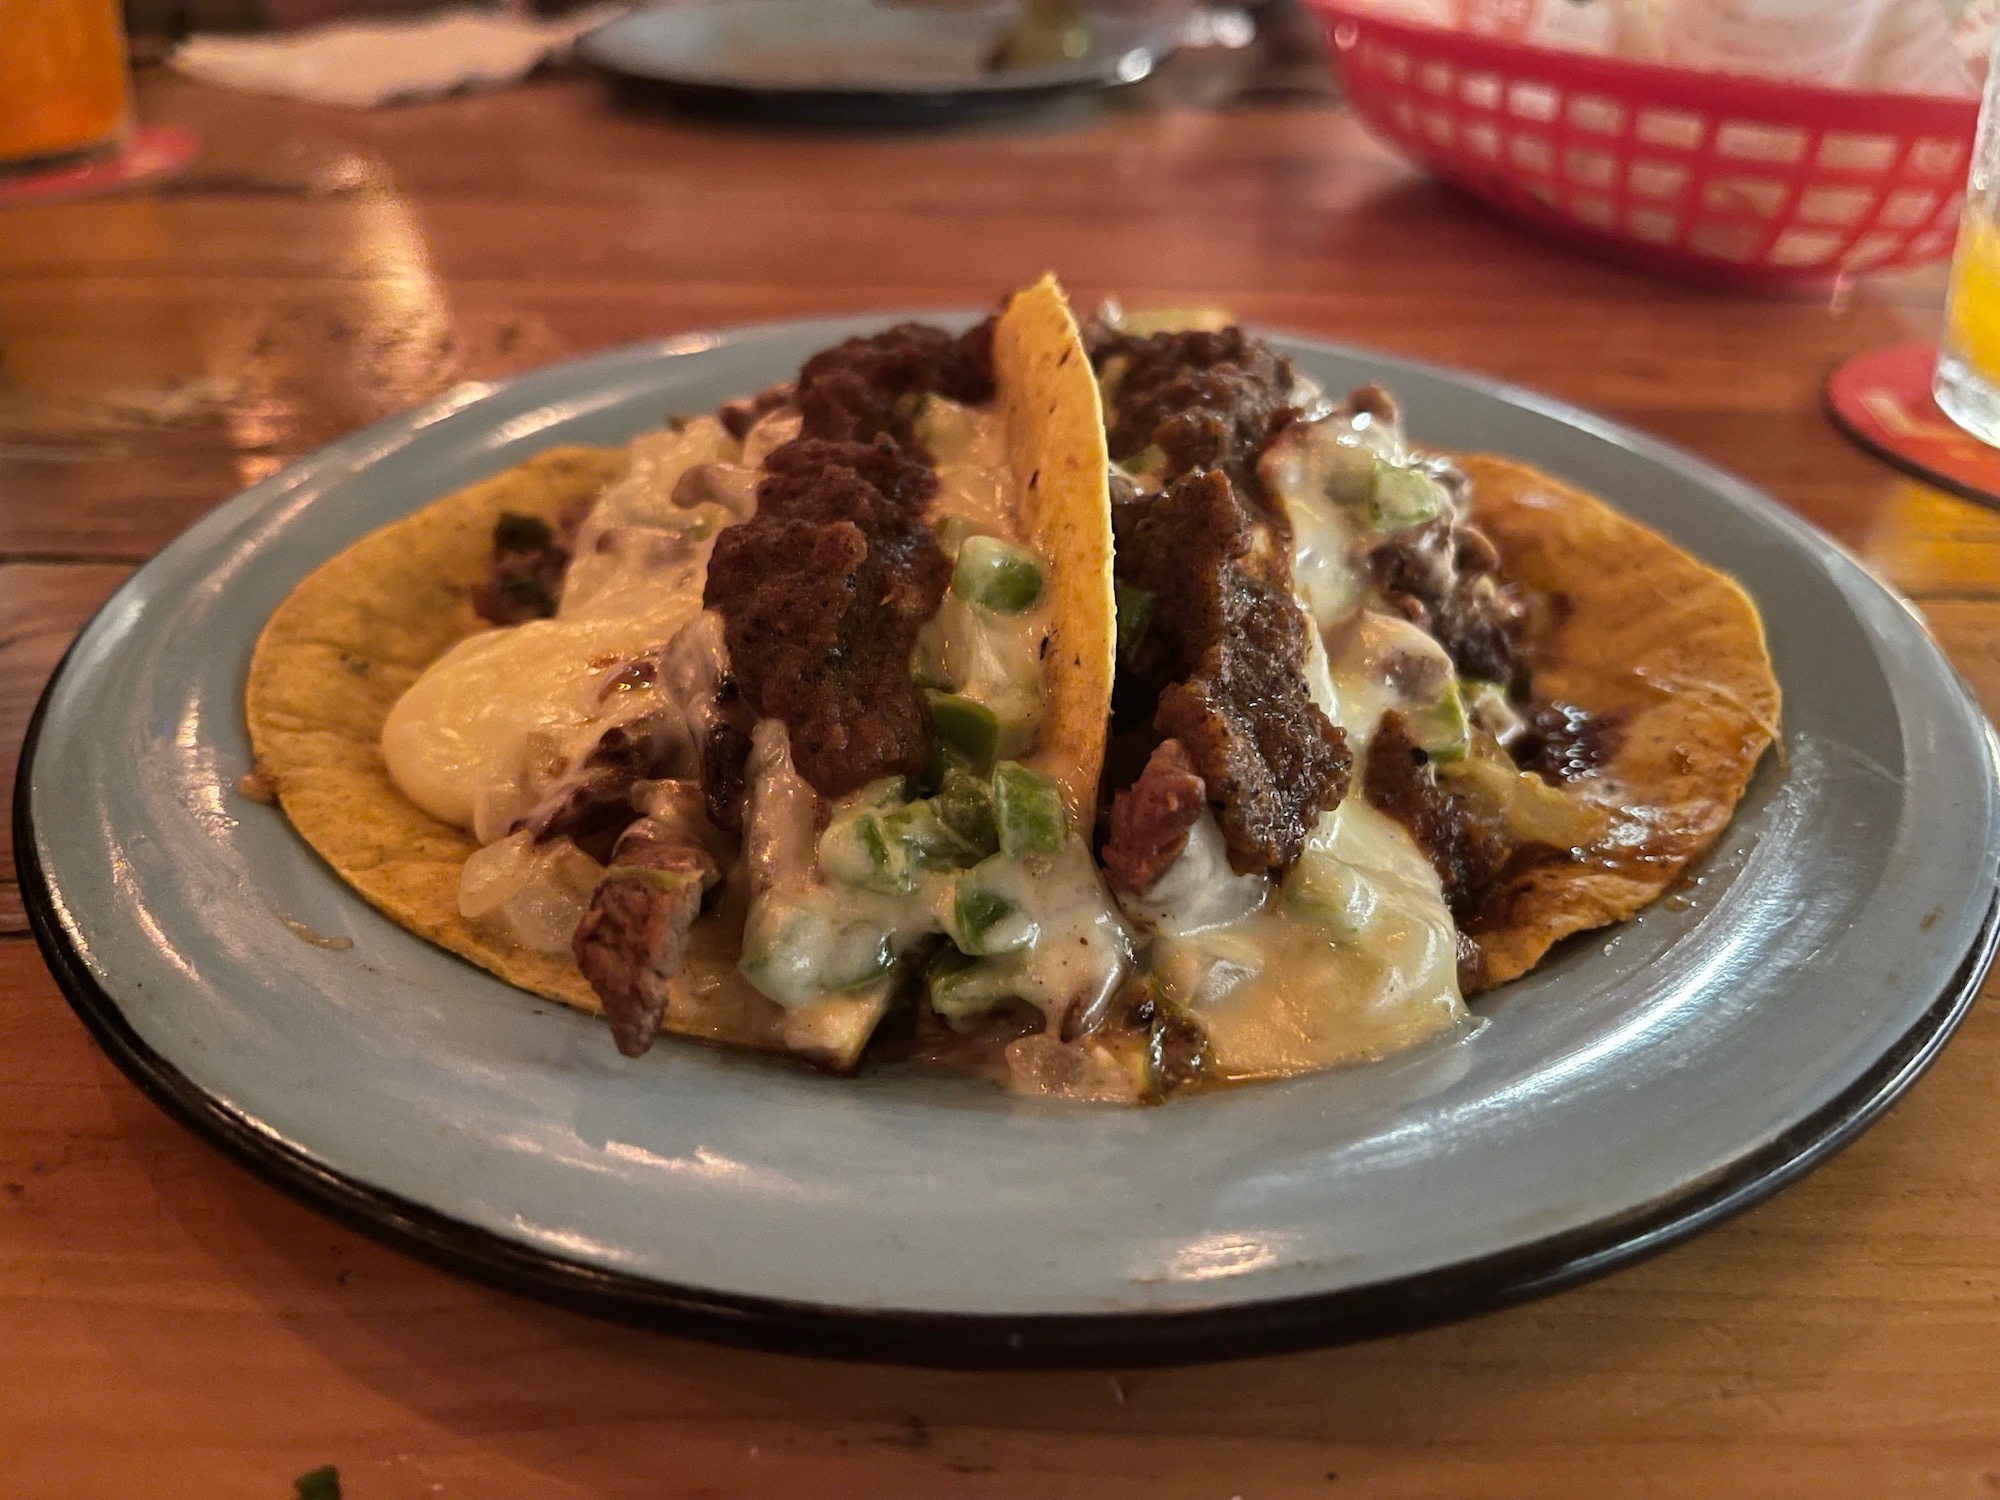 a plate of tacos with meat and cheese